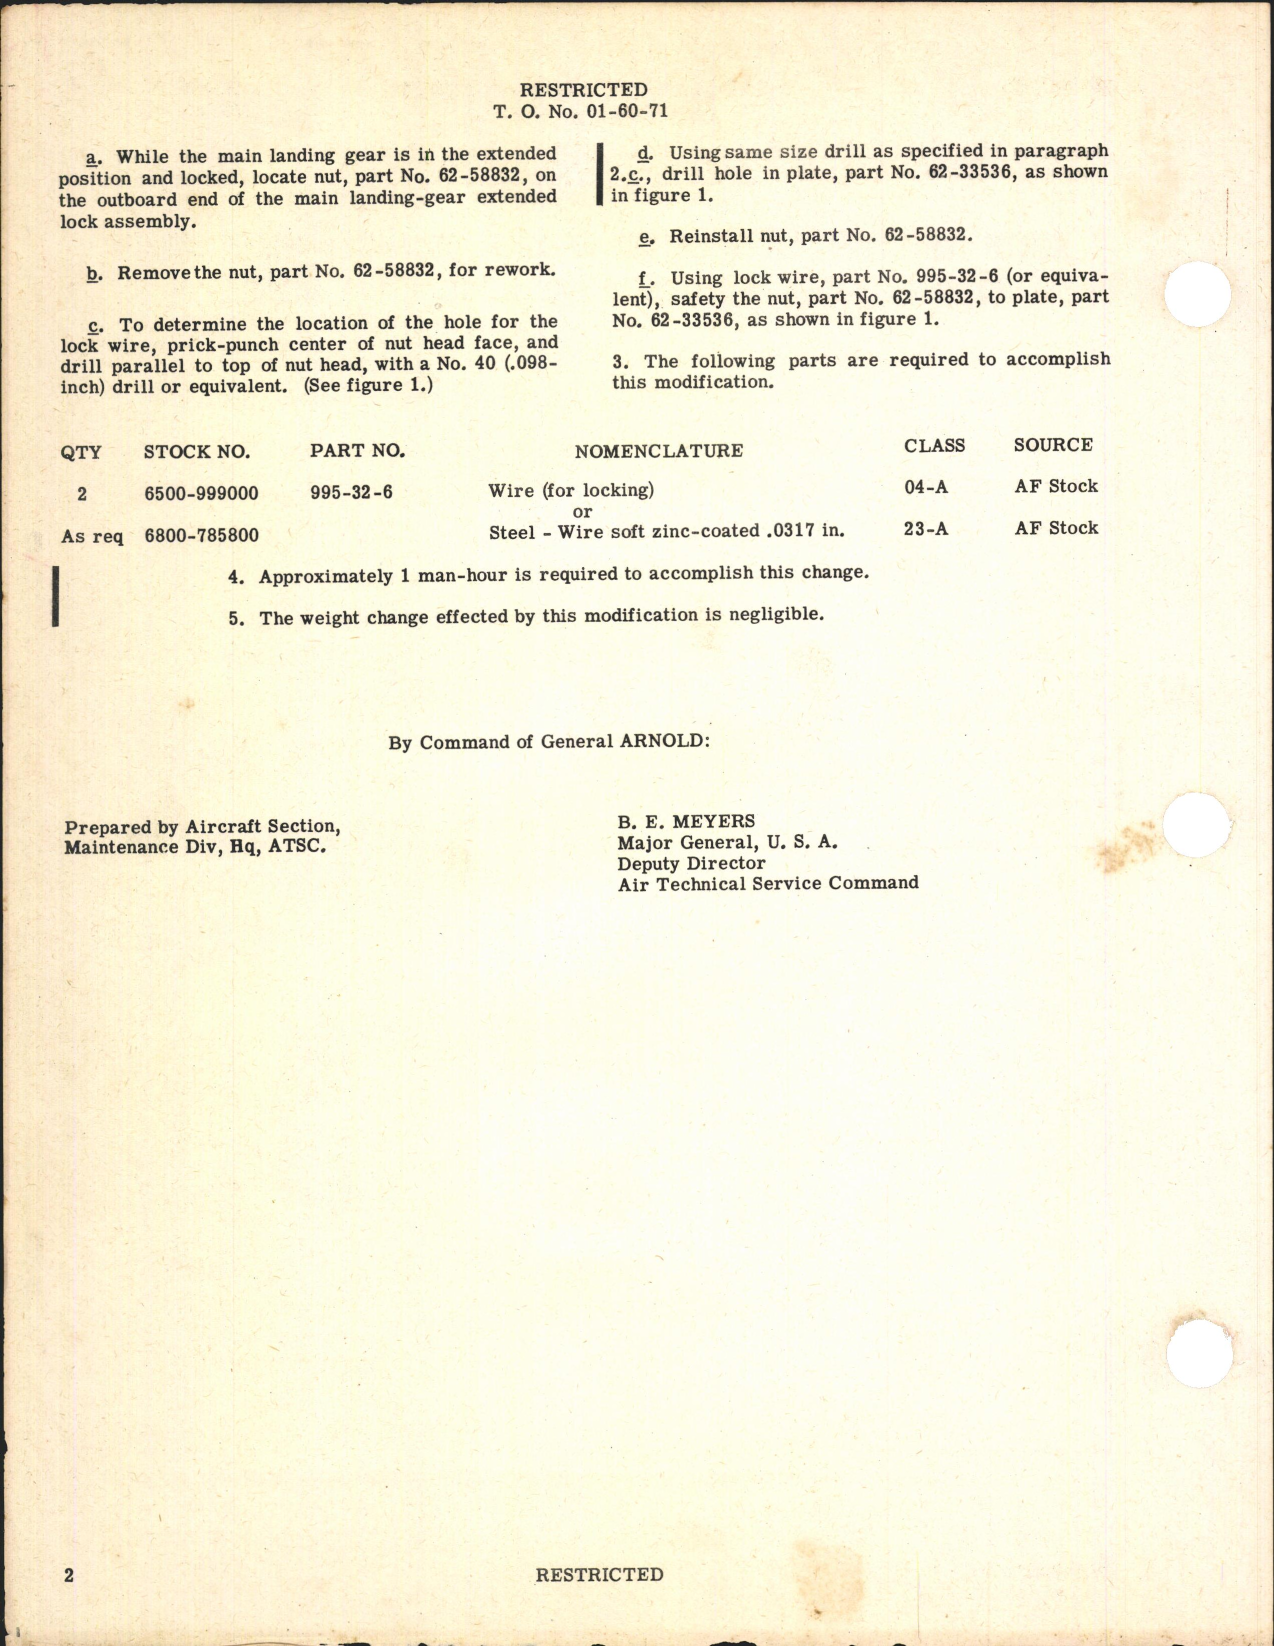 Sample page 2 from AirCorps Library document: Installation of Lock Assembly - Main Landing Gear 